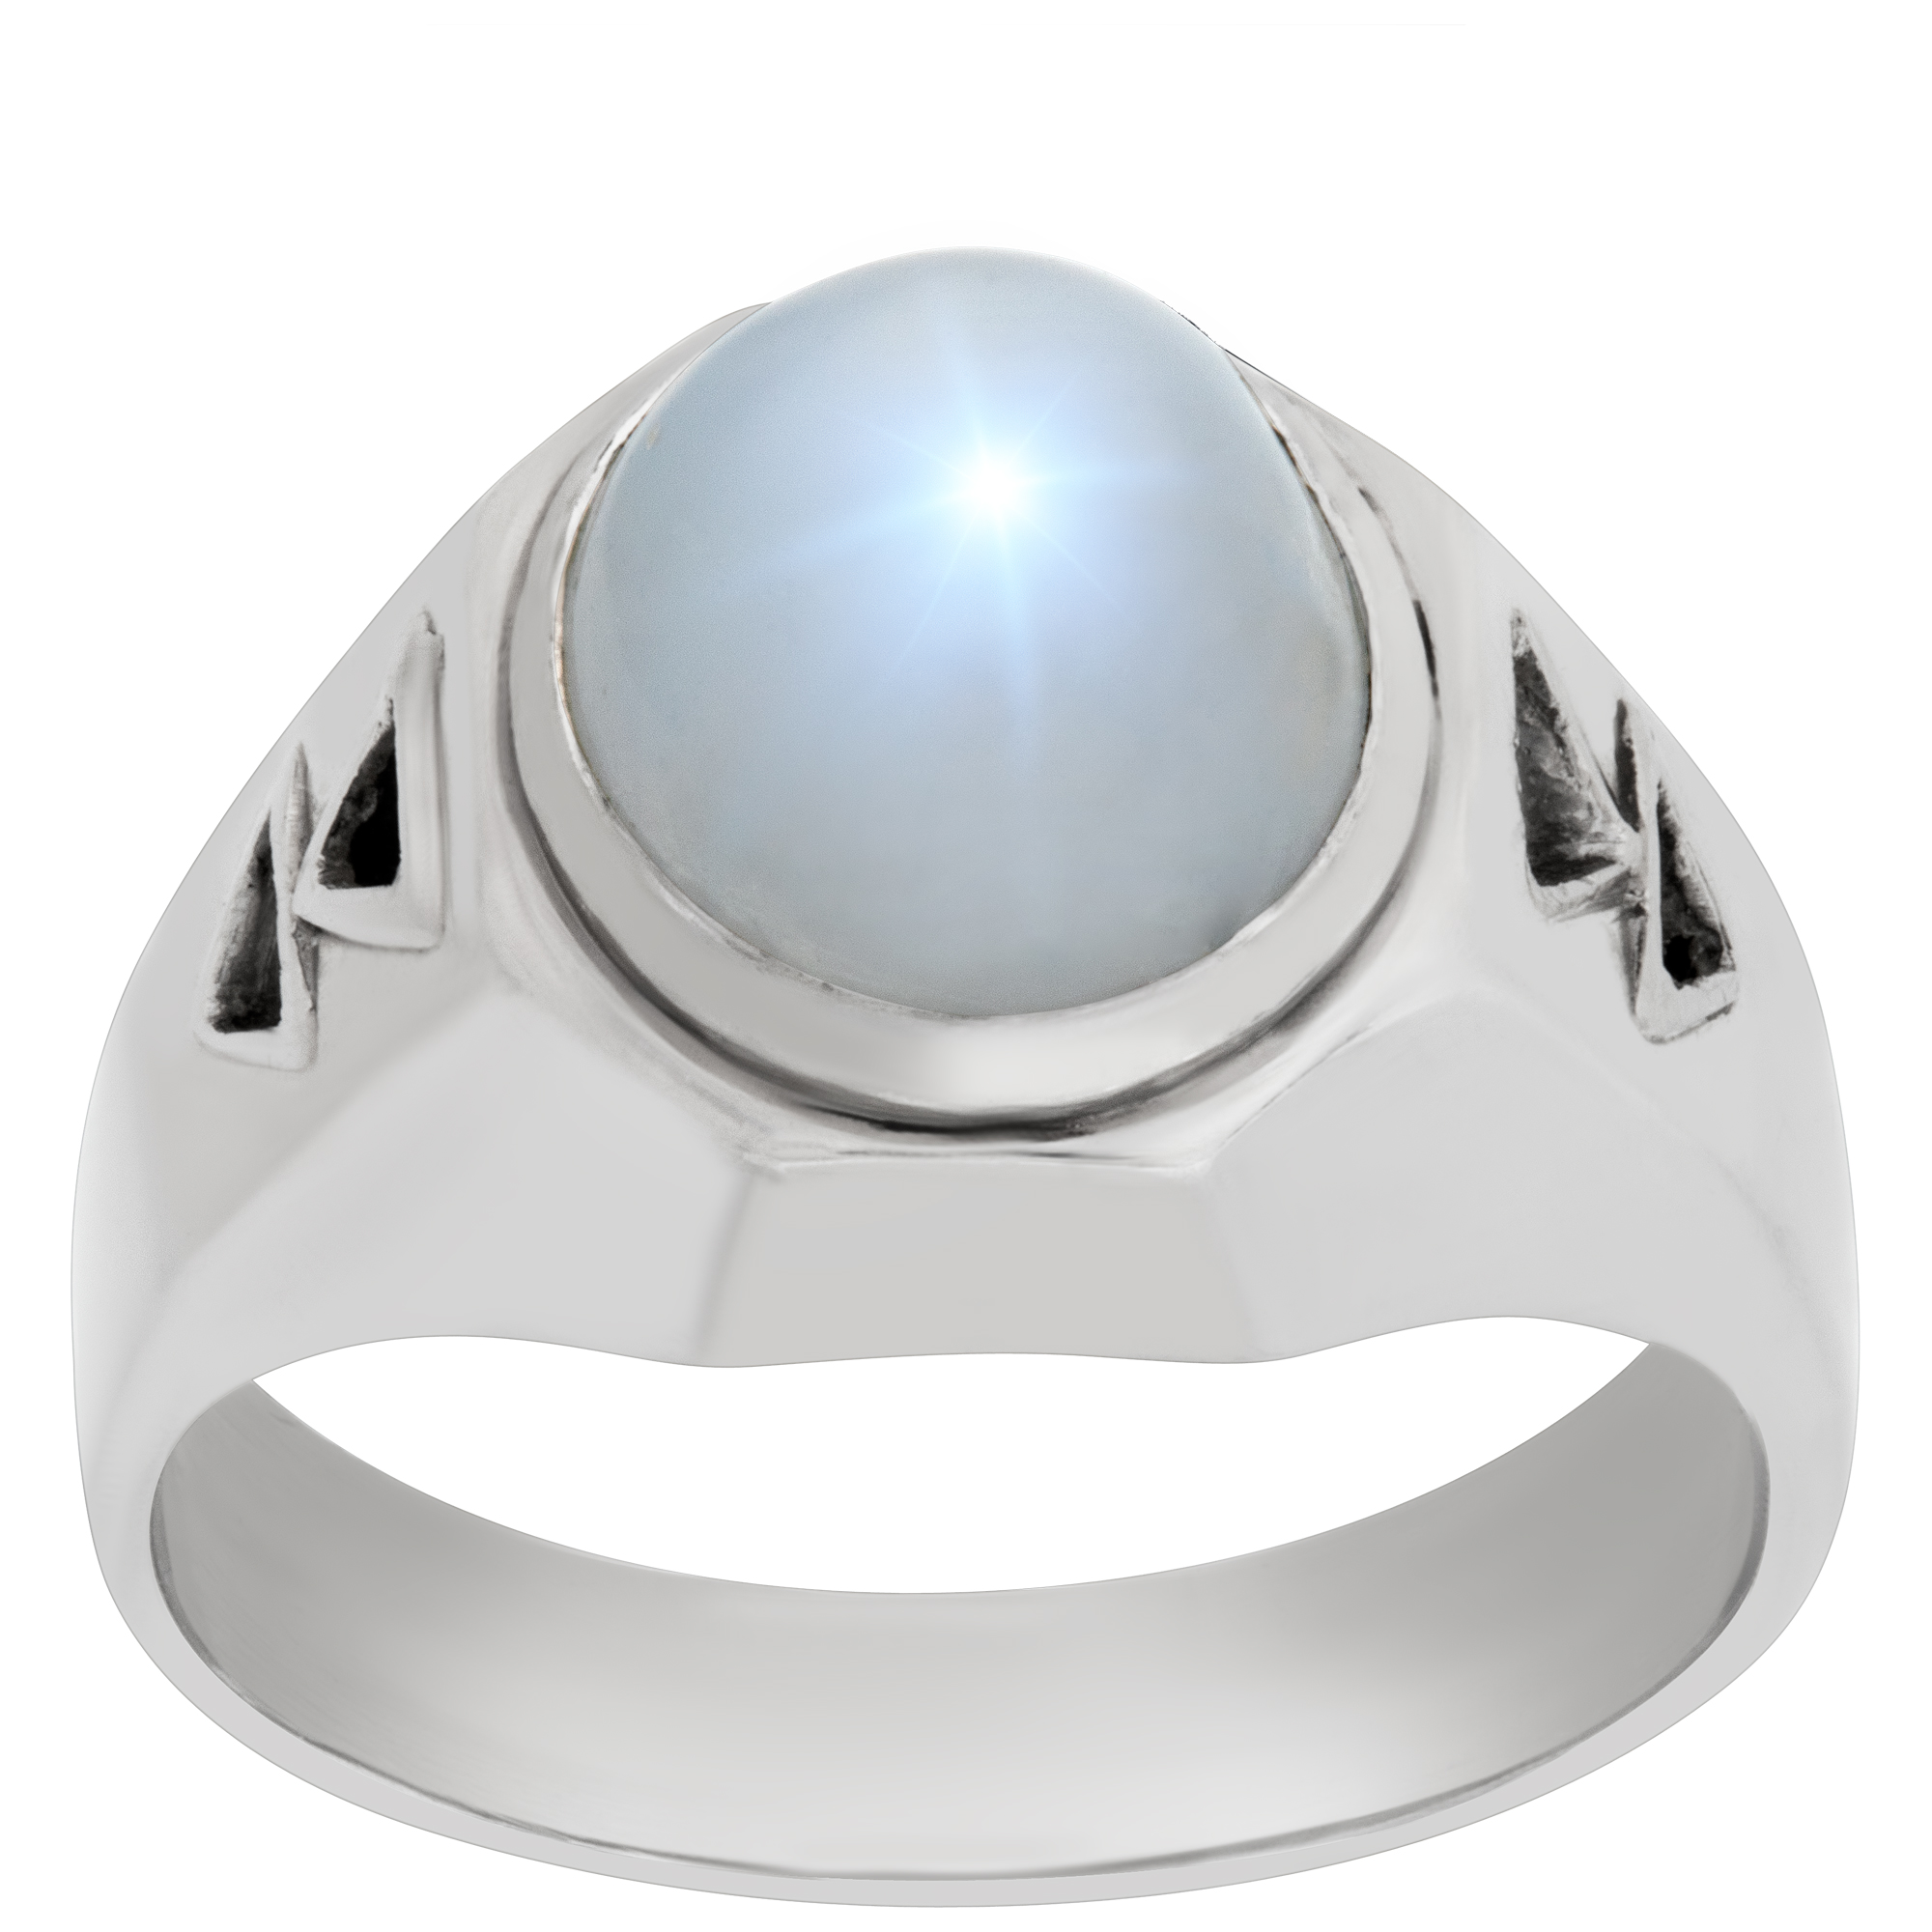 Platinum ring with a center star sapphire approx. 4 carats